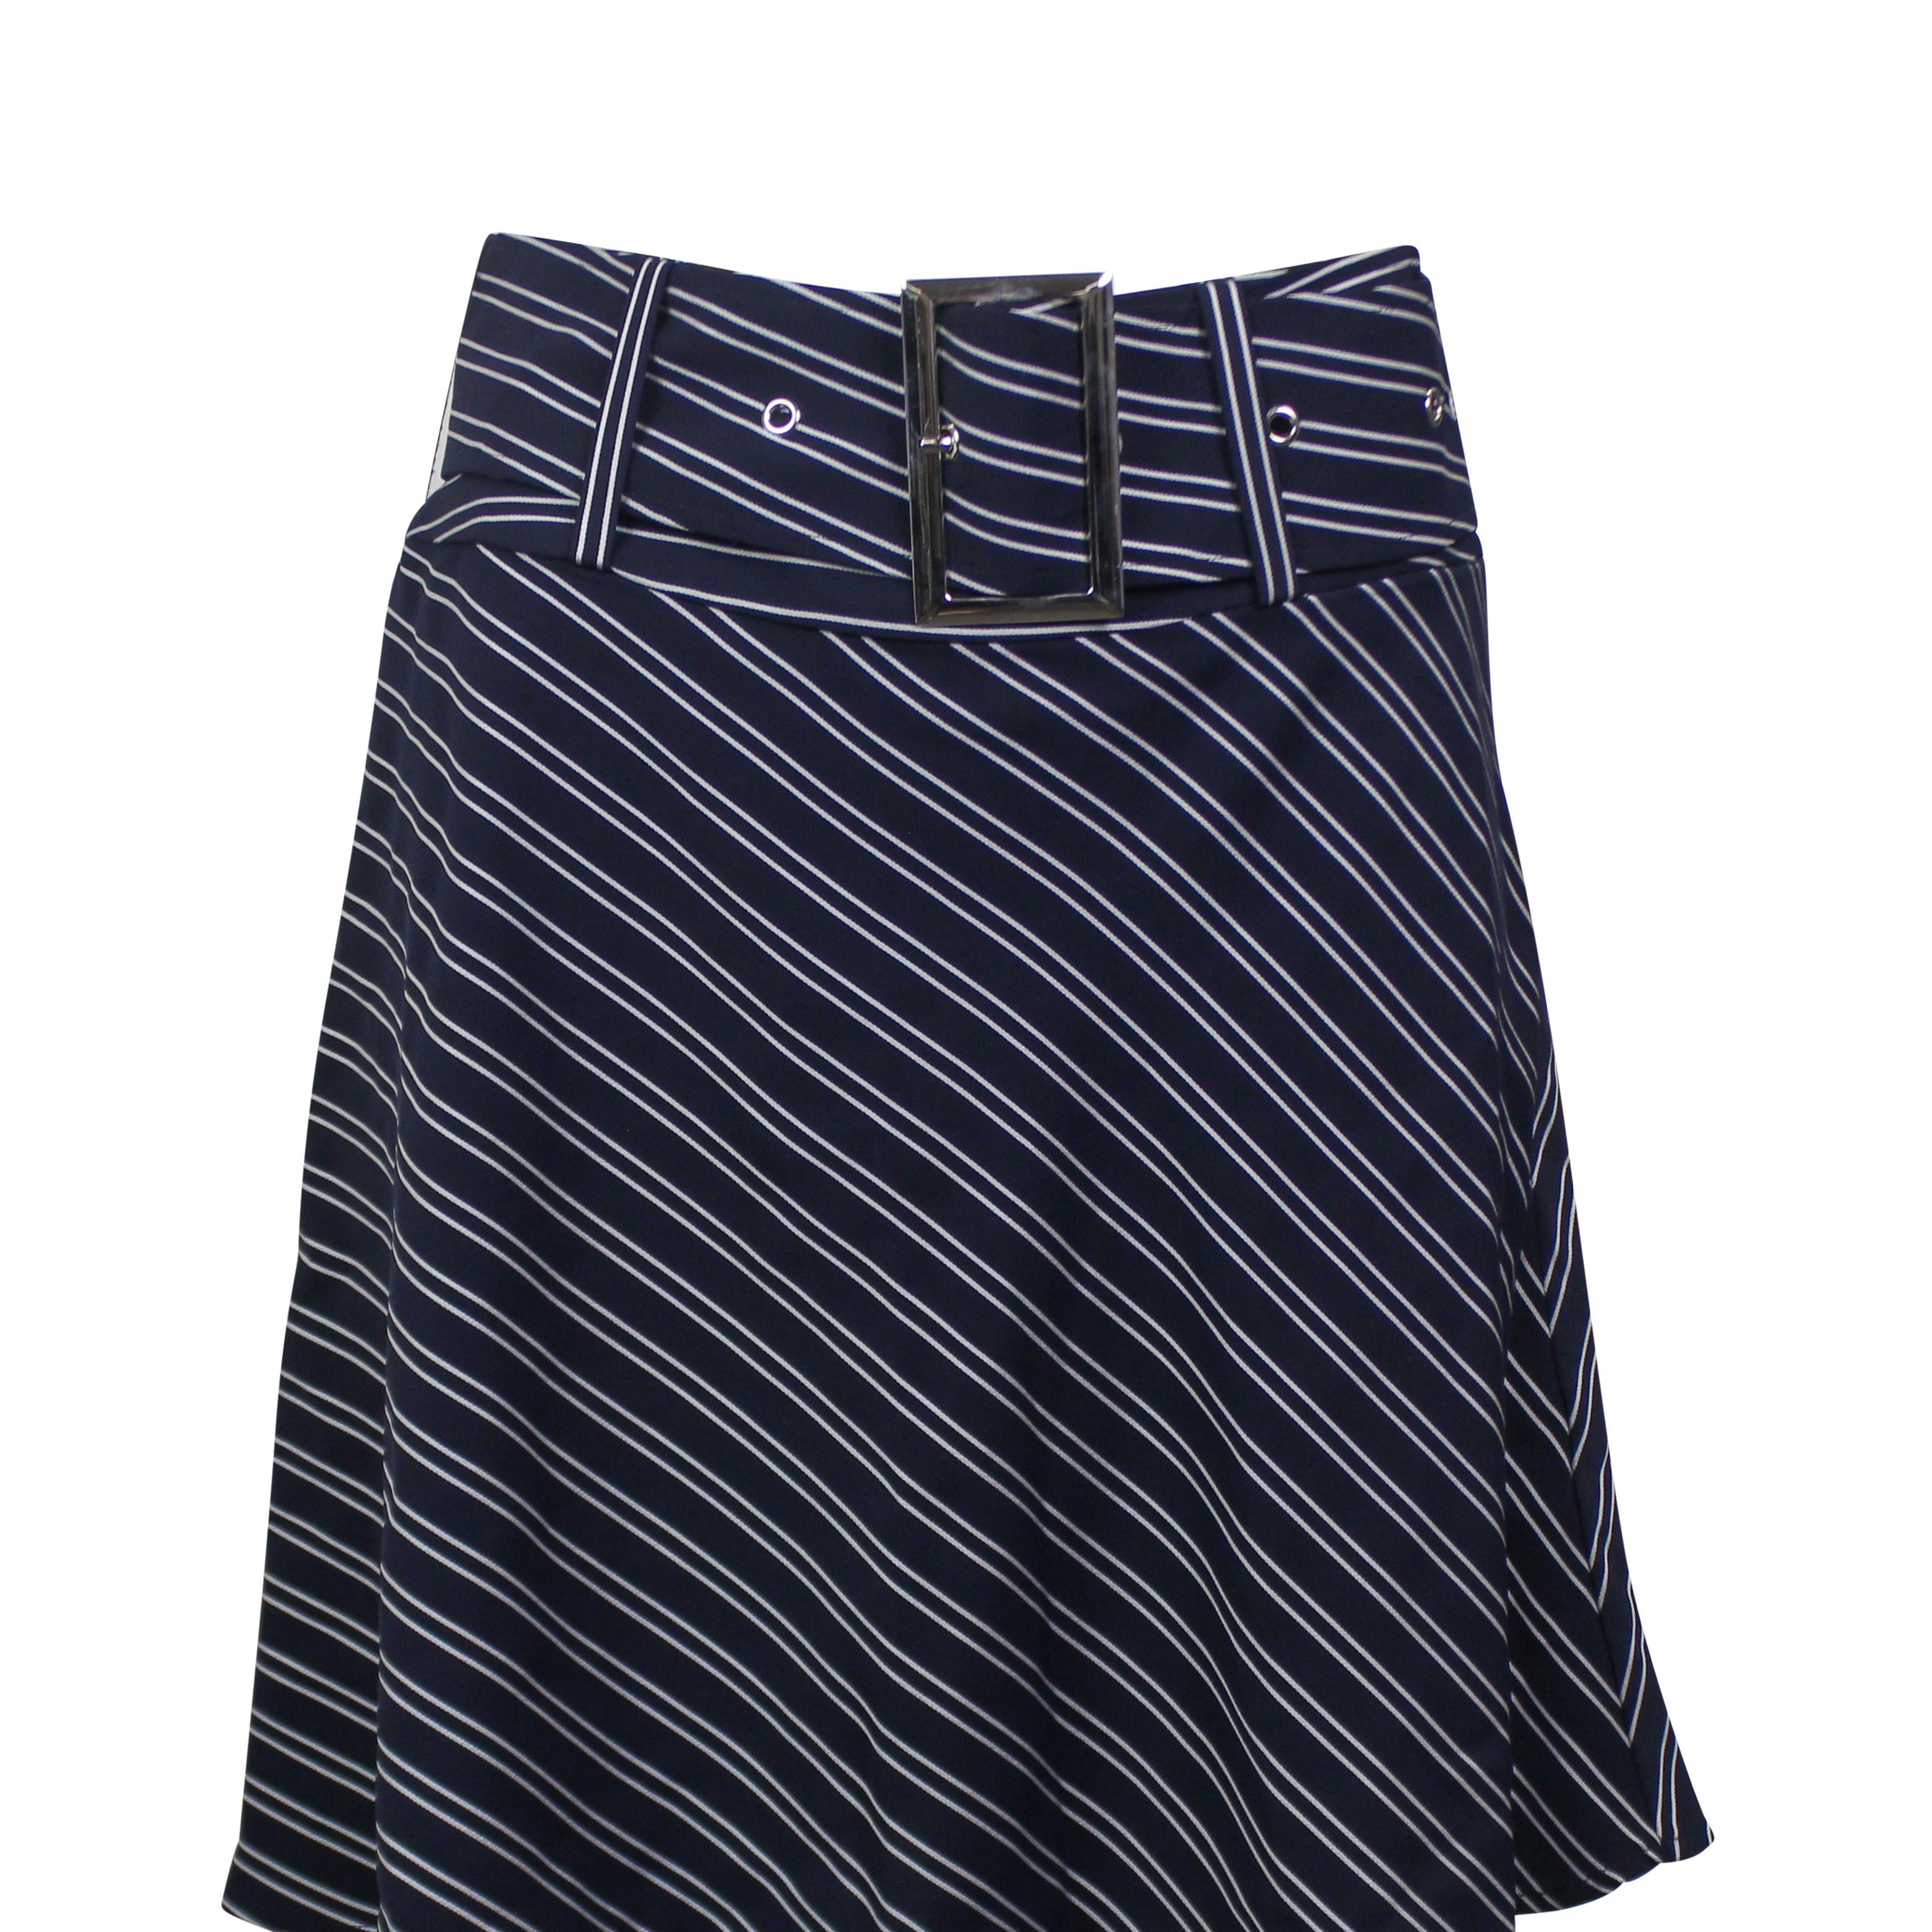 Alternate View 1 of Navy Belted Striped Flare Mini Skirt